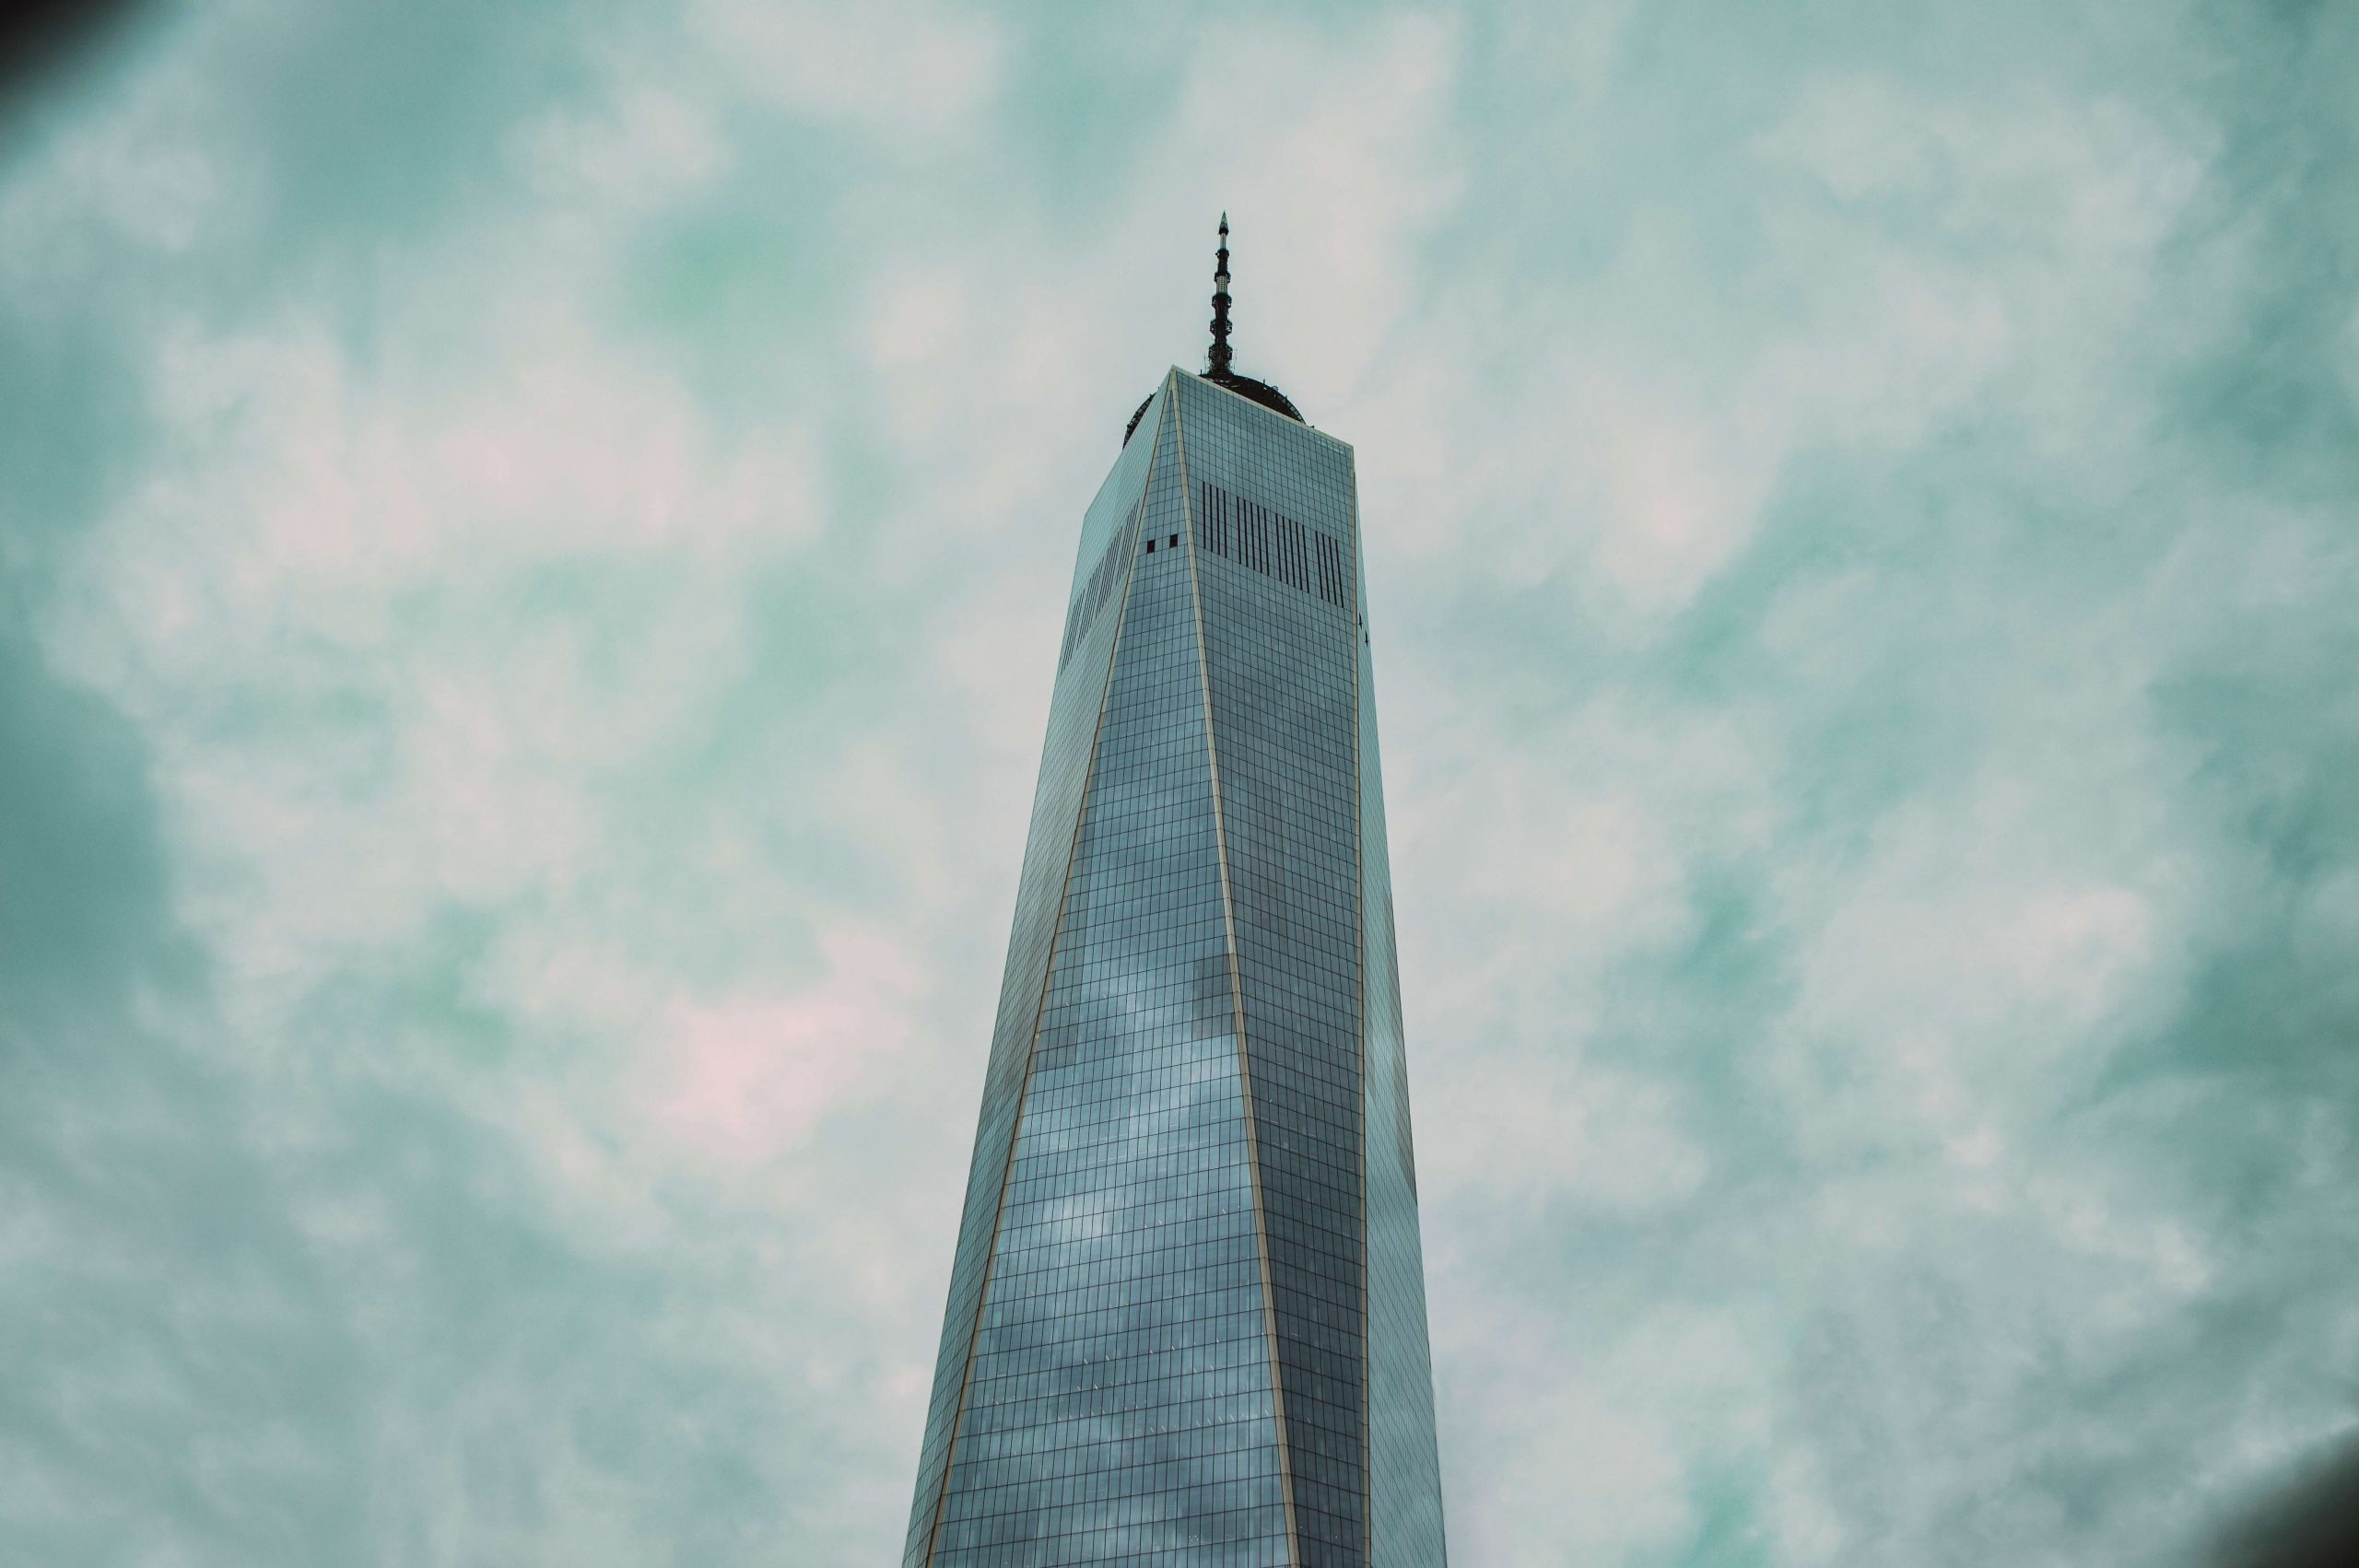 One World Trade Center - All You Need to Know BEFORE You Go (with Photos)